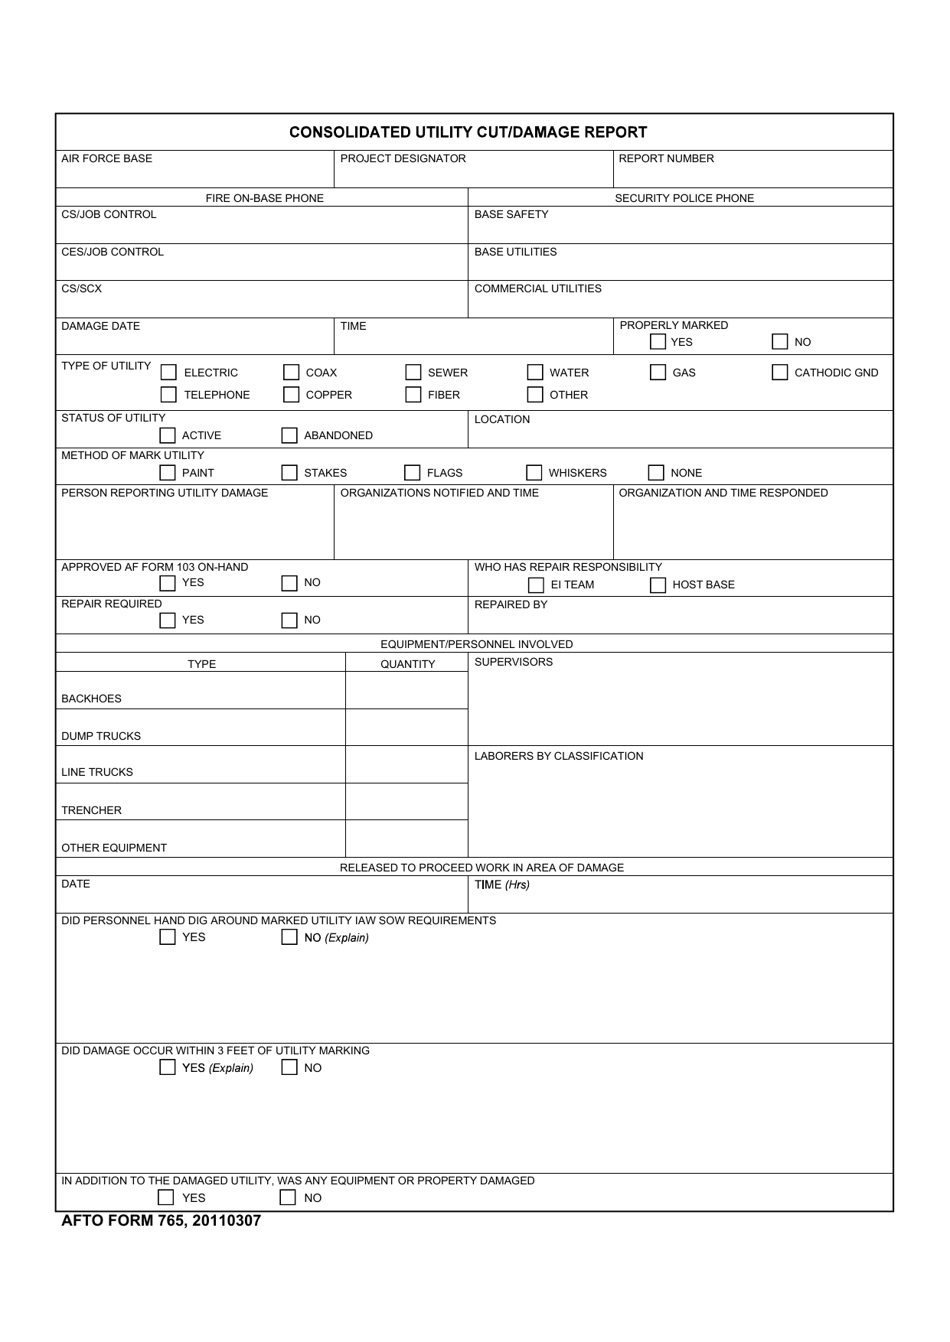 AFTO Form 765 Consolidated Utility Cut / Damage Report, Page 1